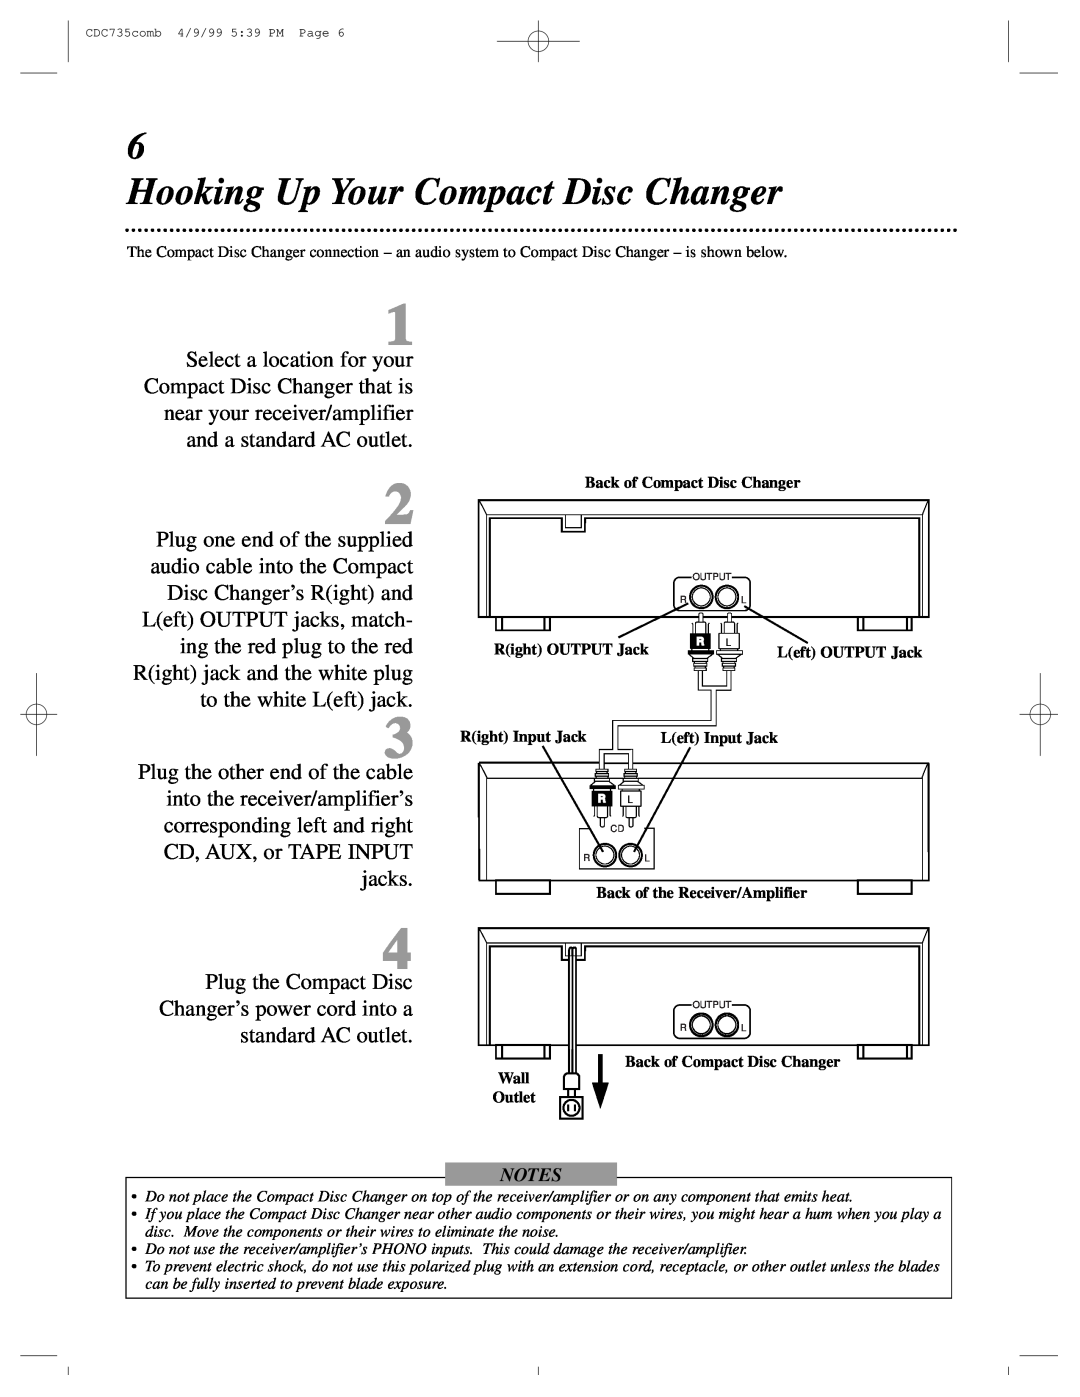 Philips CDC735 Hooking Up Your Compact Disc Changer, Back of Compact Disc Changer, Right OUTPUT Jack, Left OUTPUT Jack 